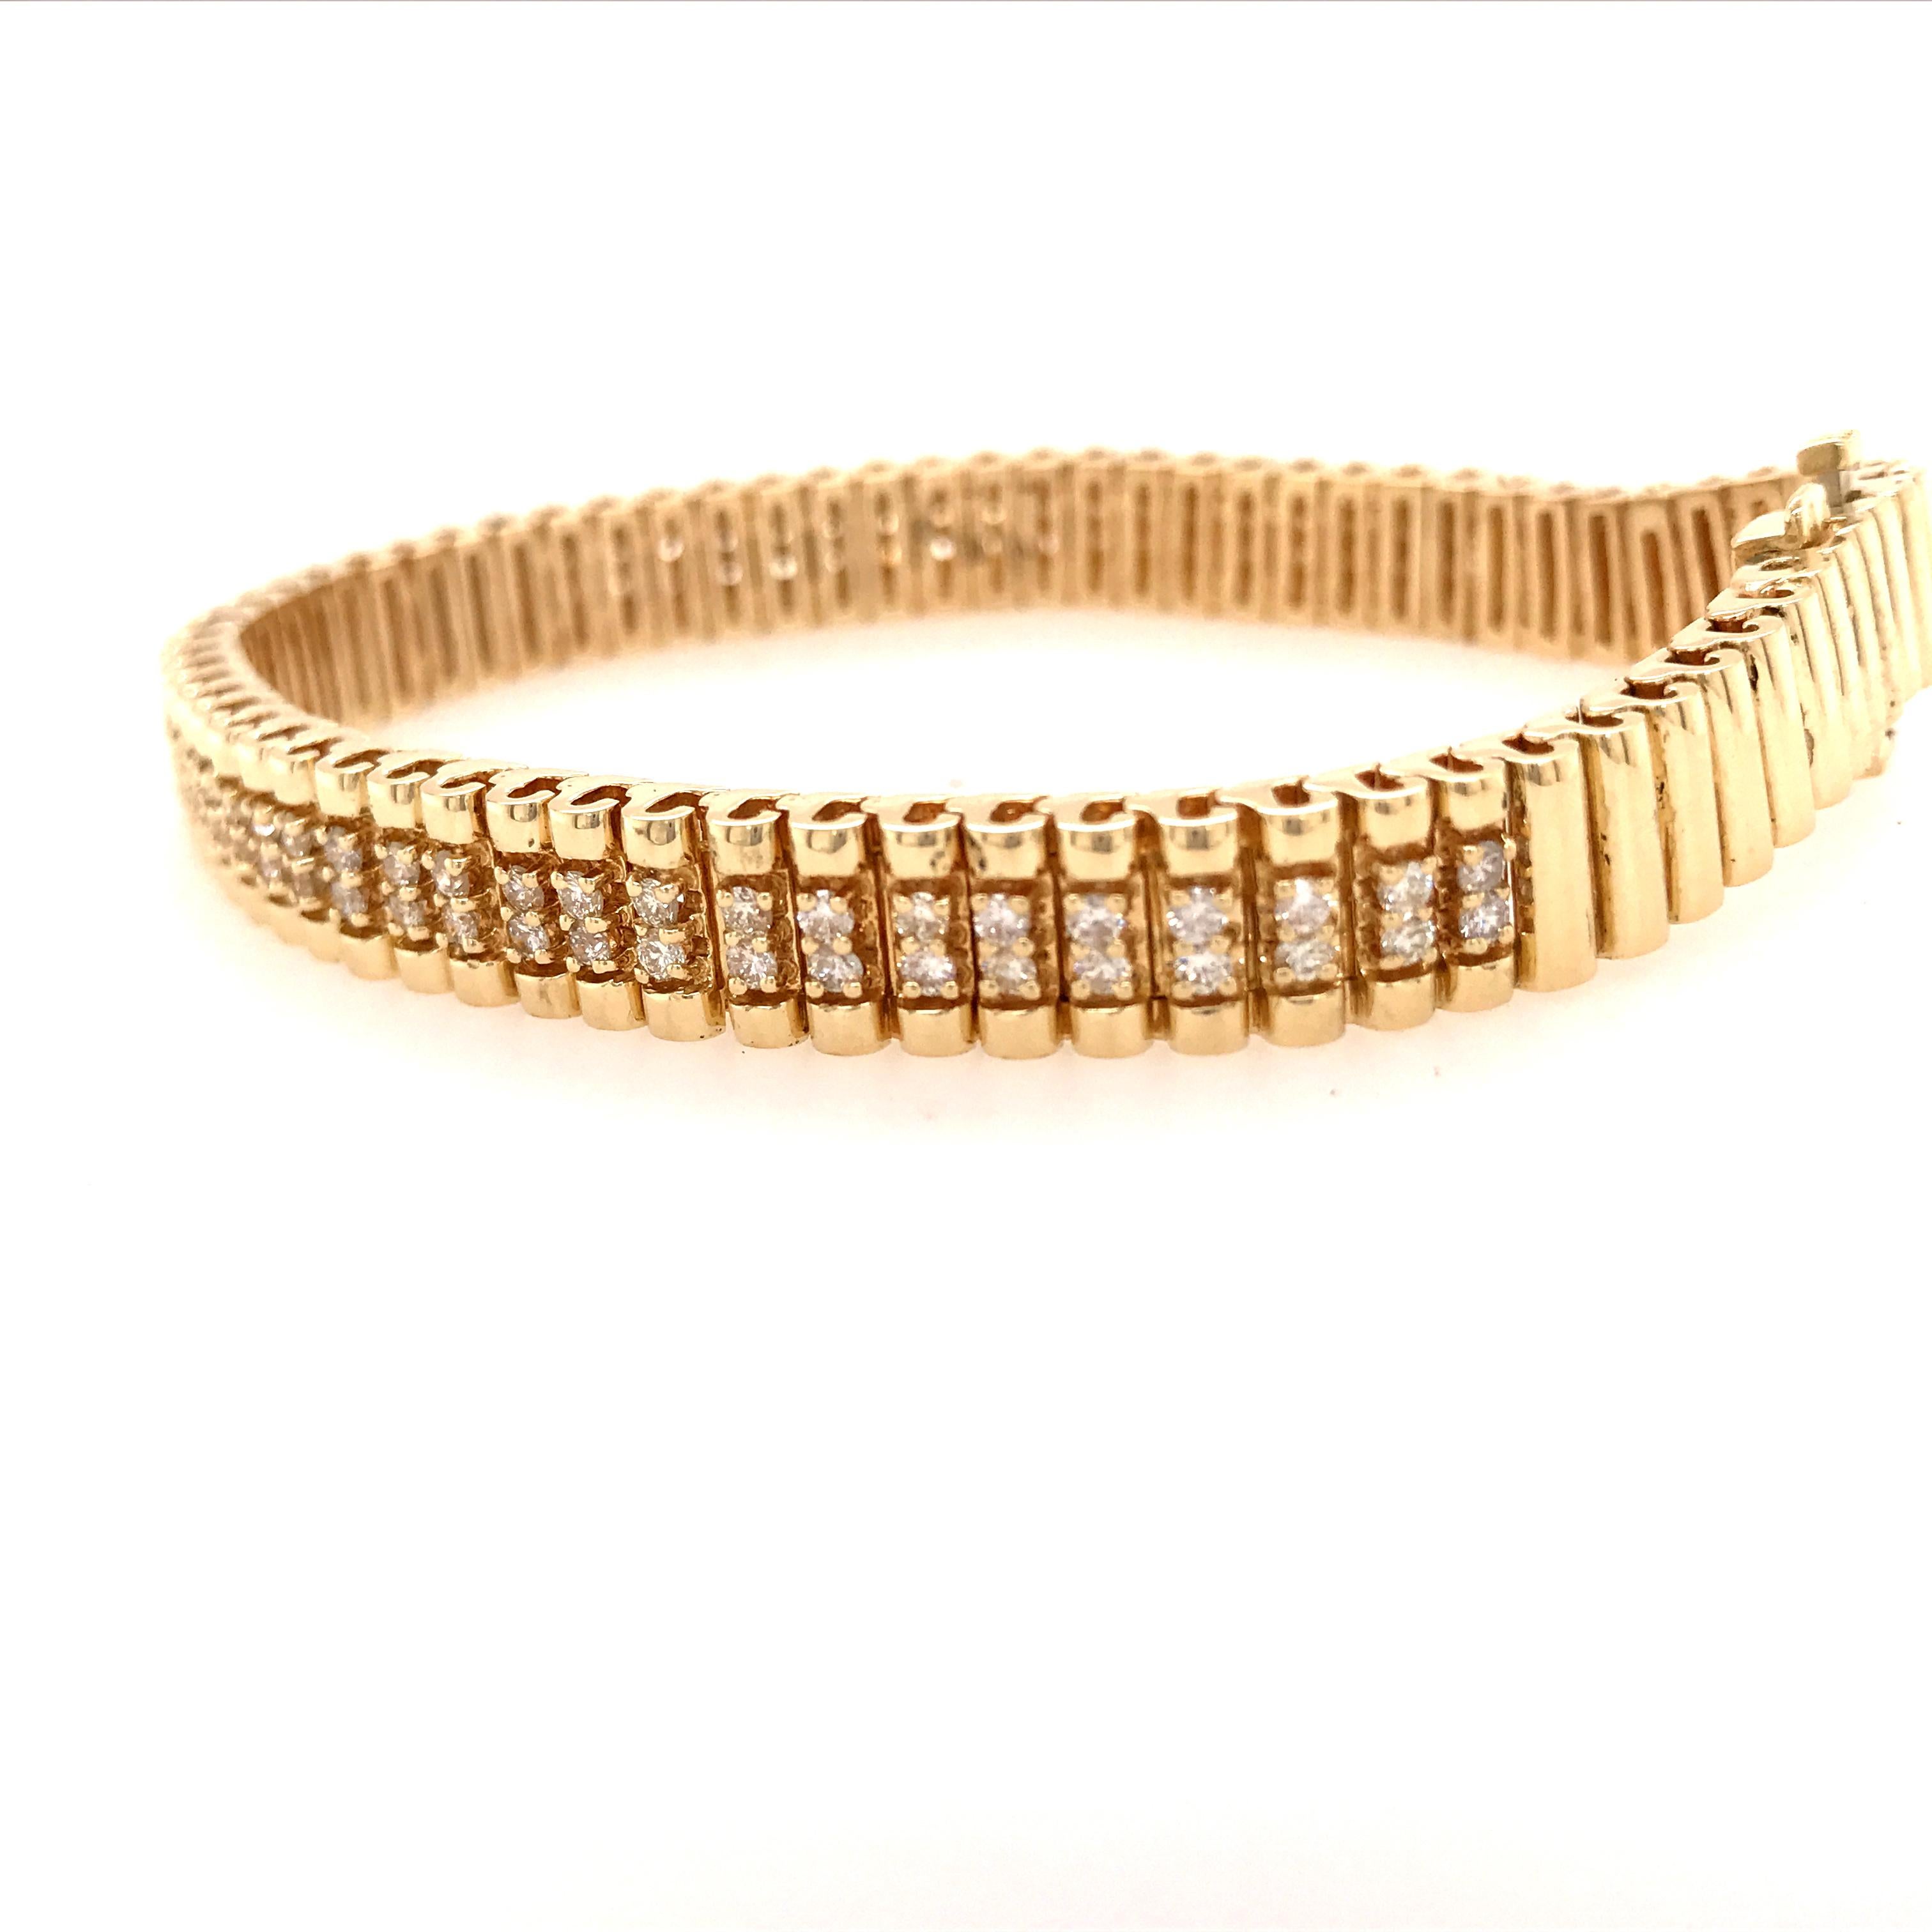 Diamond Line Bracelet in 14K Yellow Gold.  (50) Round Brilliant Cut Diamonds weighing 1.25 carat total weight G-H in color and VS-SI in clarity are expertly set.  The Bracelet measures 7 1/2 inch in length and 5/16 inch in width. 37.32 grams.